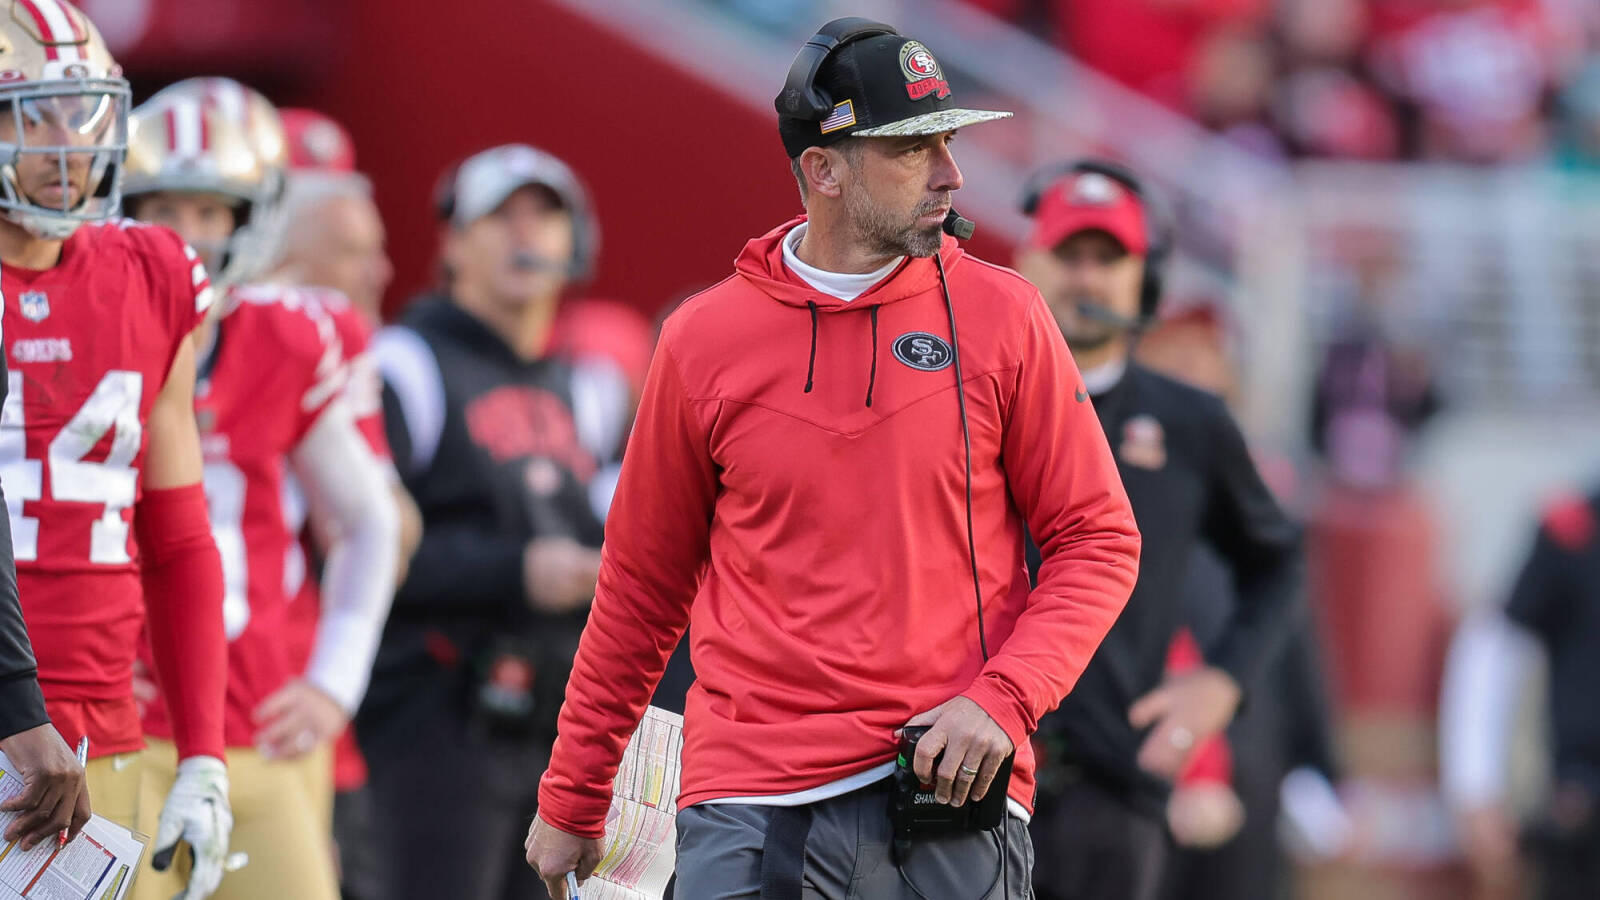 Former 49ers wide receiver not a fan of HC Kyle Shanahan's culture